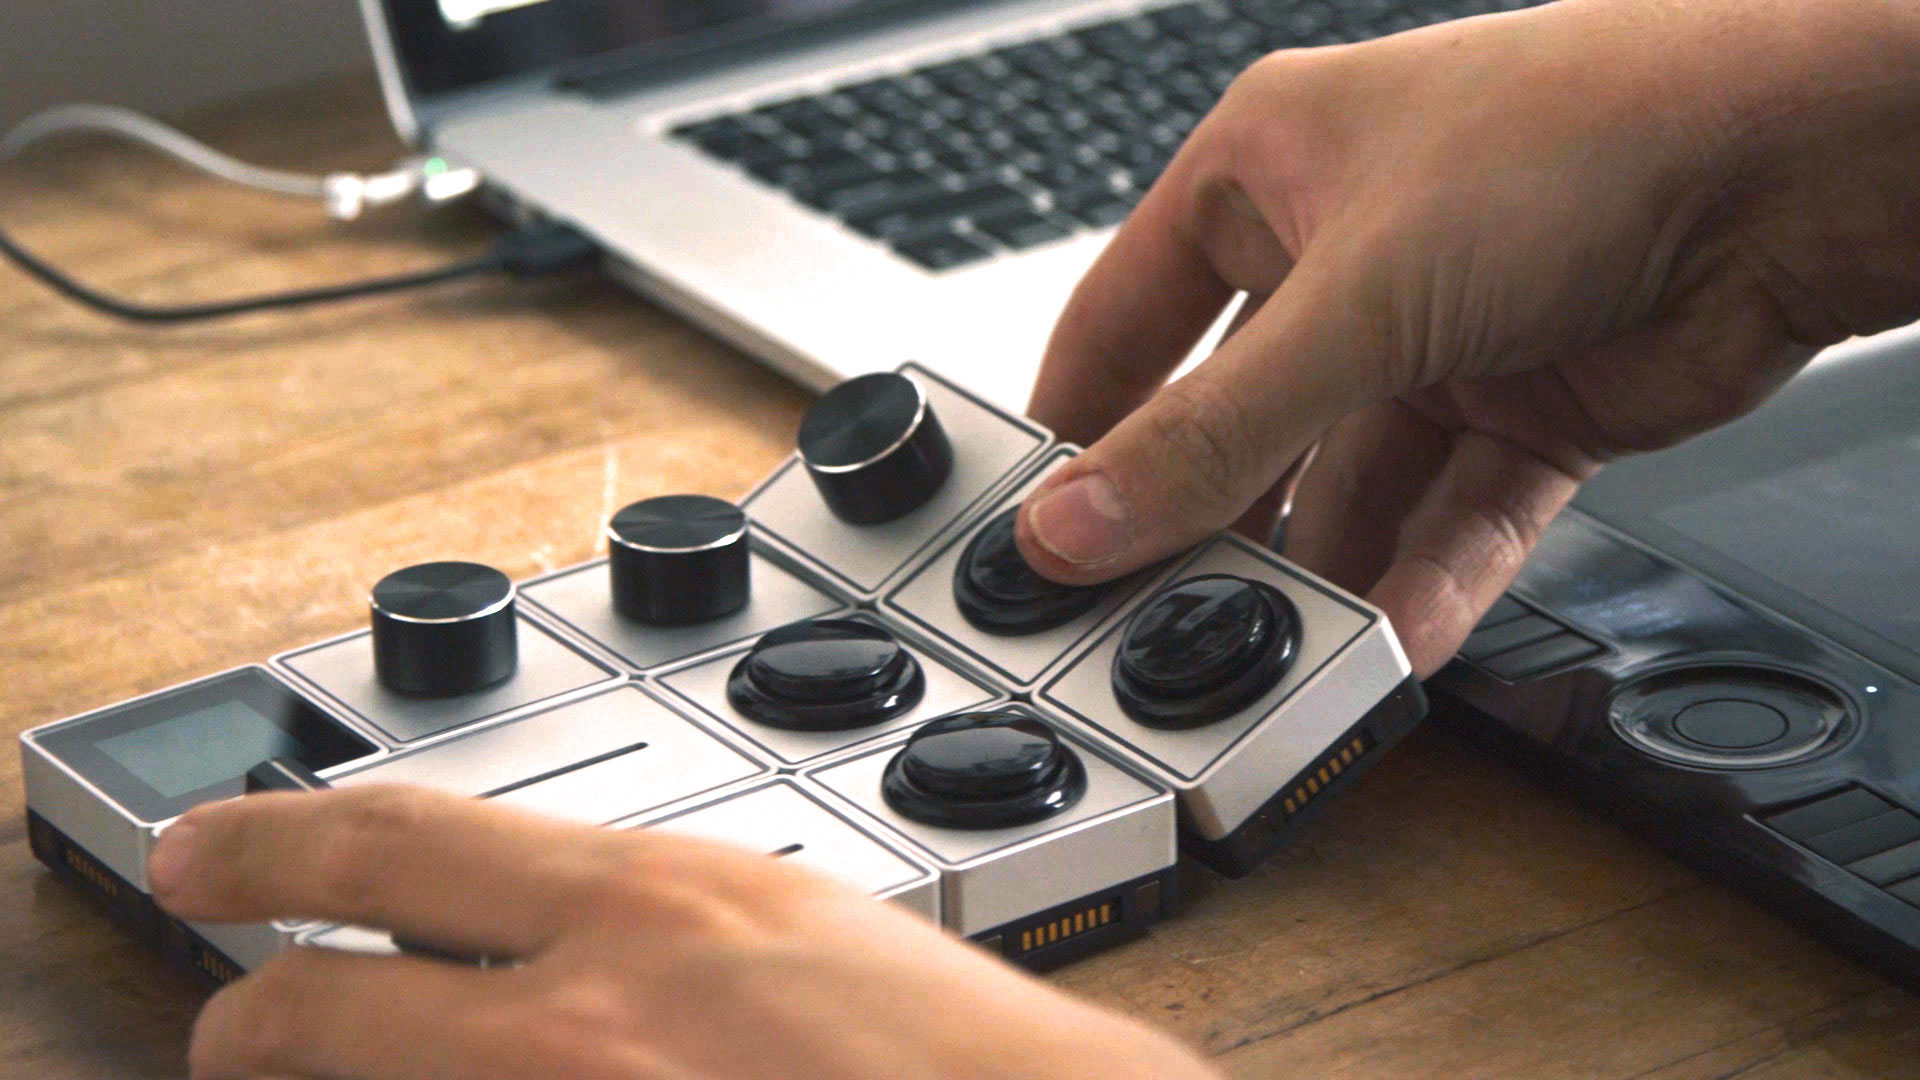 Palette's control modules snap together magnetically.